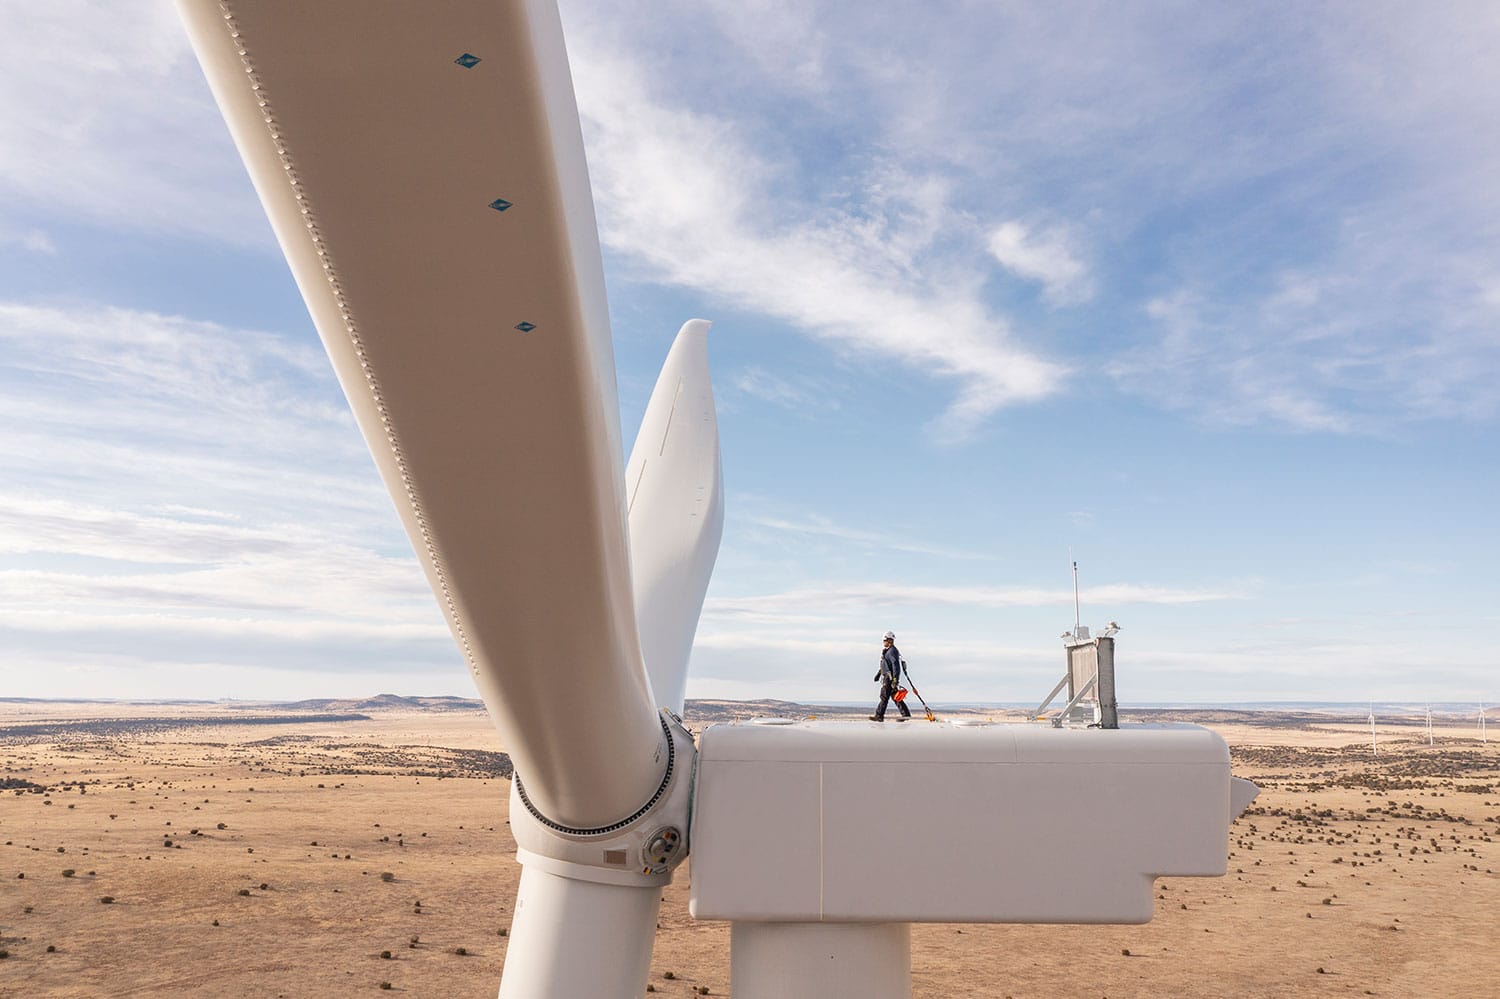 GE Vernova to supply turbines for 3.5 GW SunZia wind project.